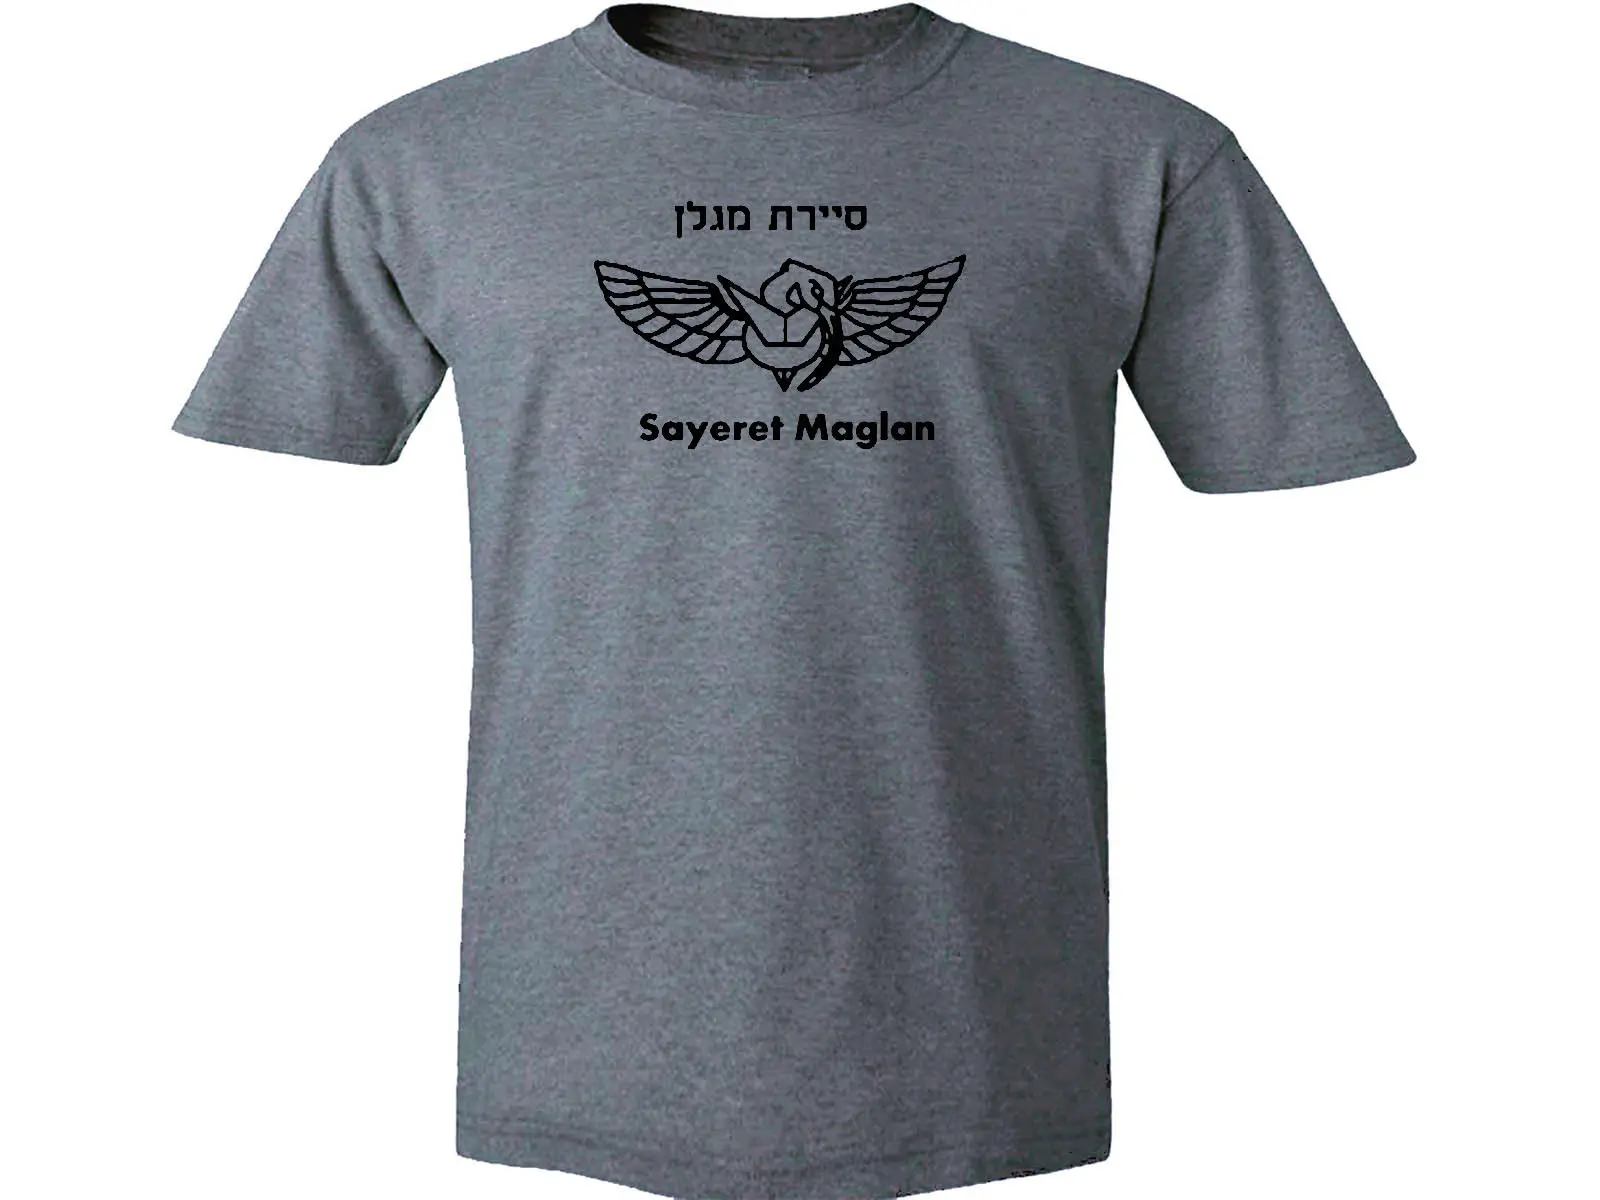 

2019 Israel army IDF special Forces unite Ops Sayeret Maglan gray military t-shirt